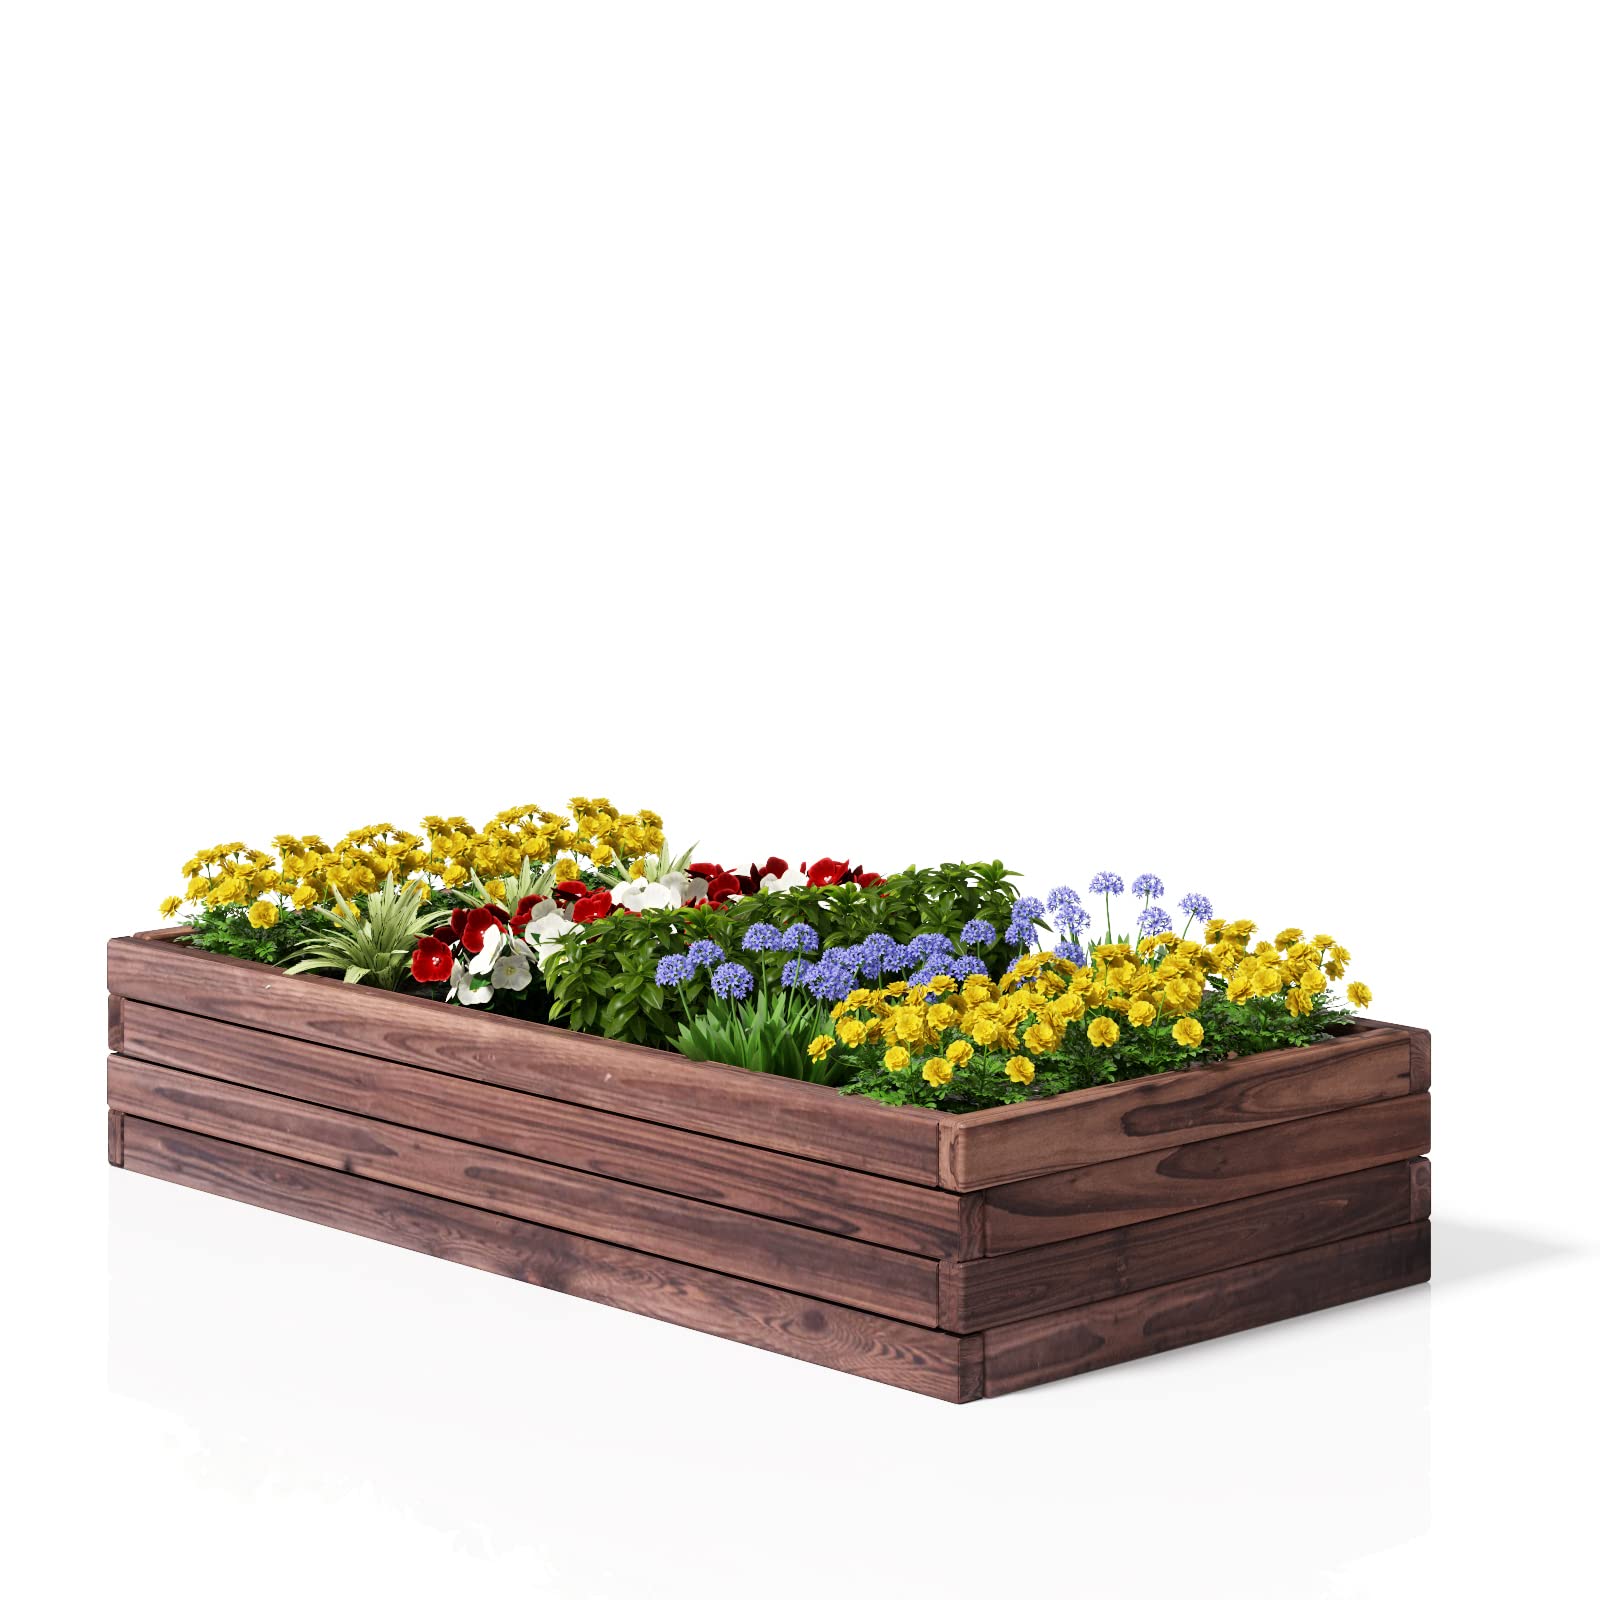 Rectangular Planter for Patio and Lawn 47'' L x 24'' W x 9'' H, (Brown)